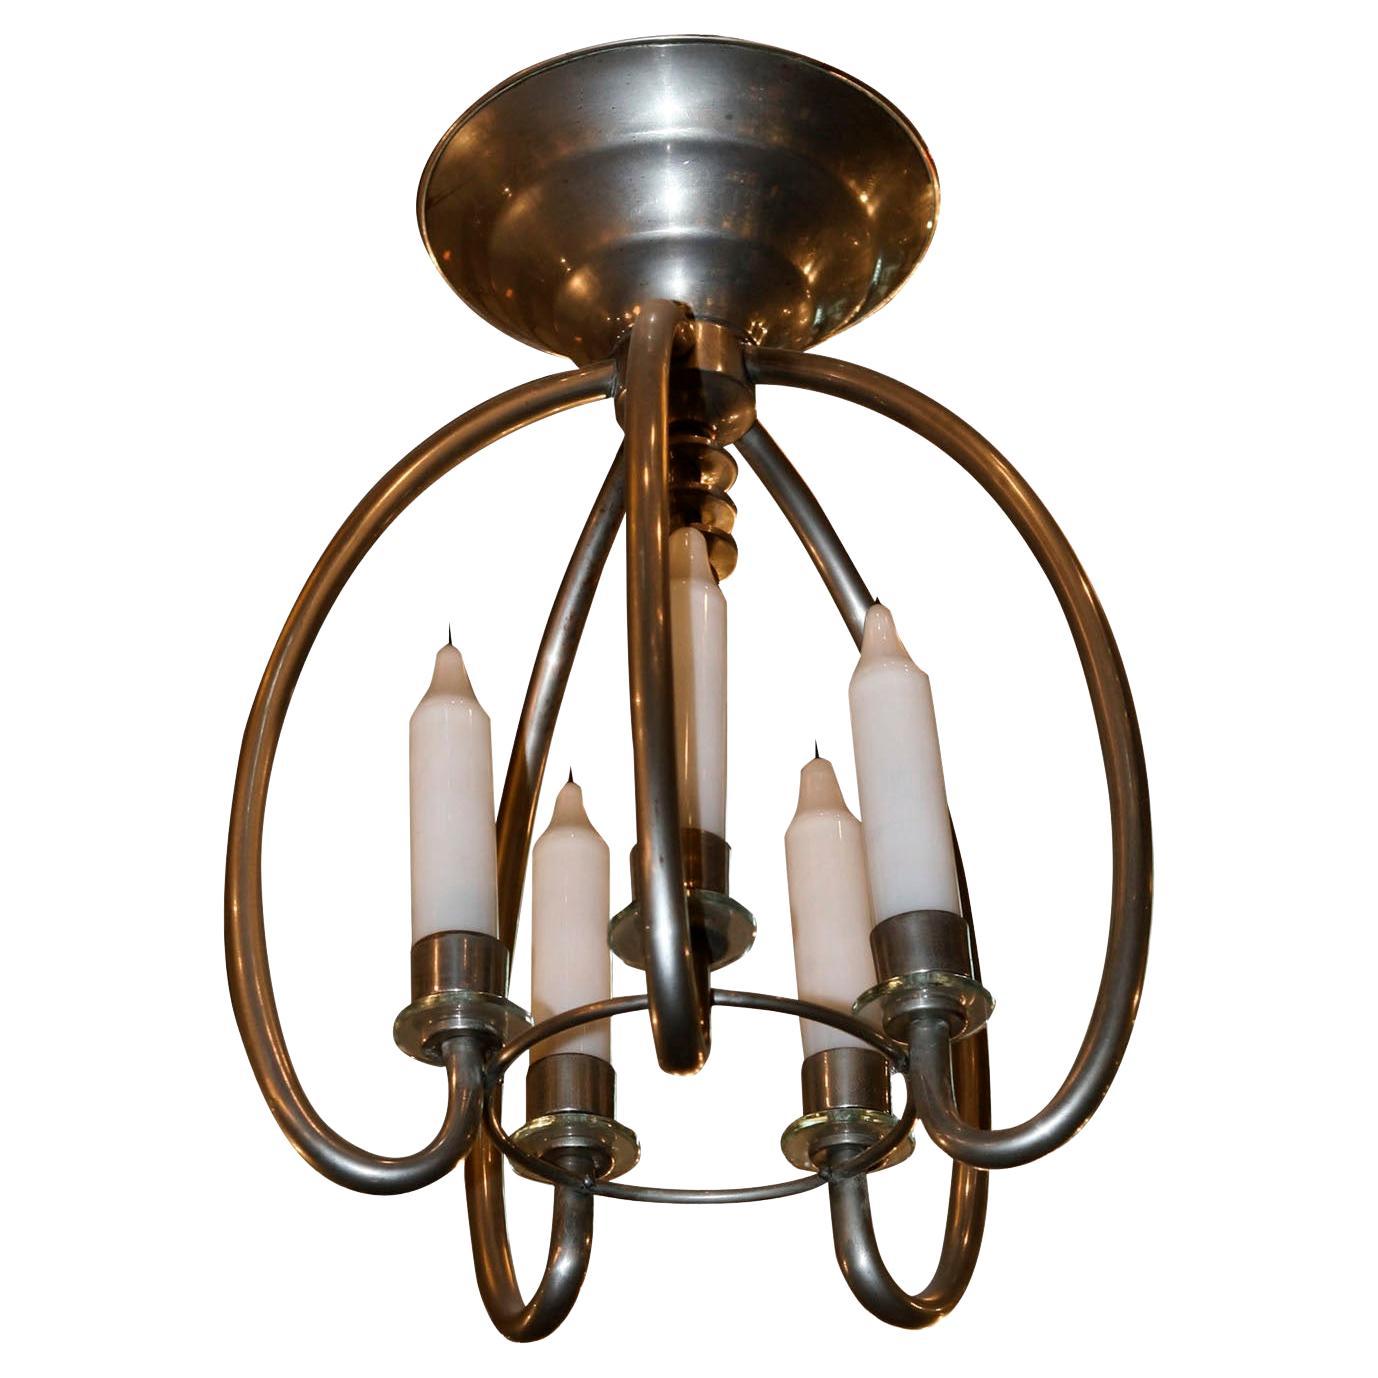 Hanging Lamp German in Opaline, Chromed Bronze, 1920, Style Art. Deco For Sale